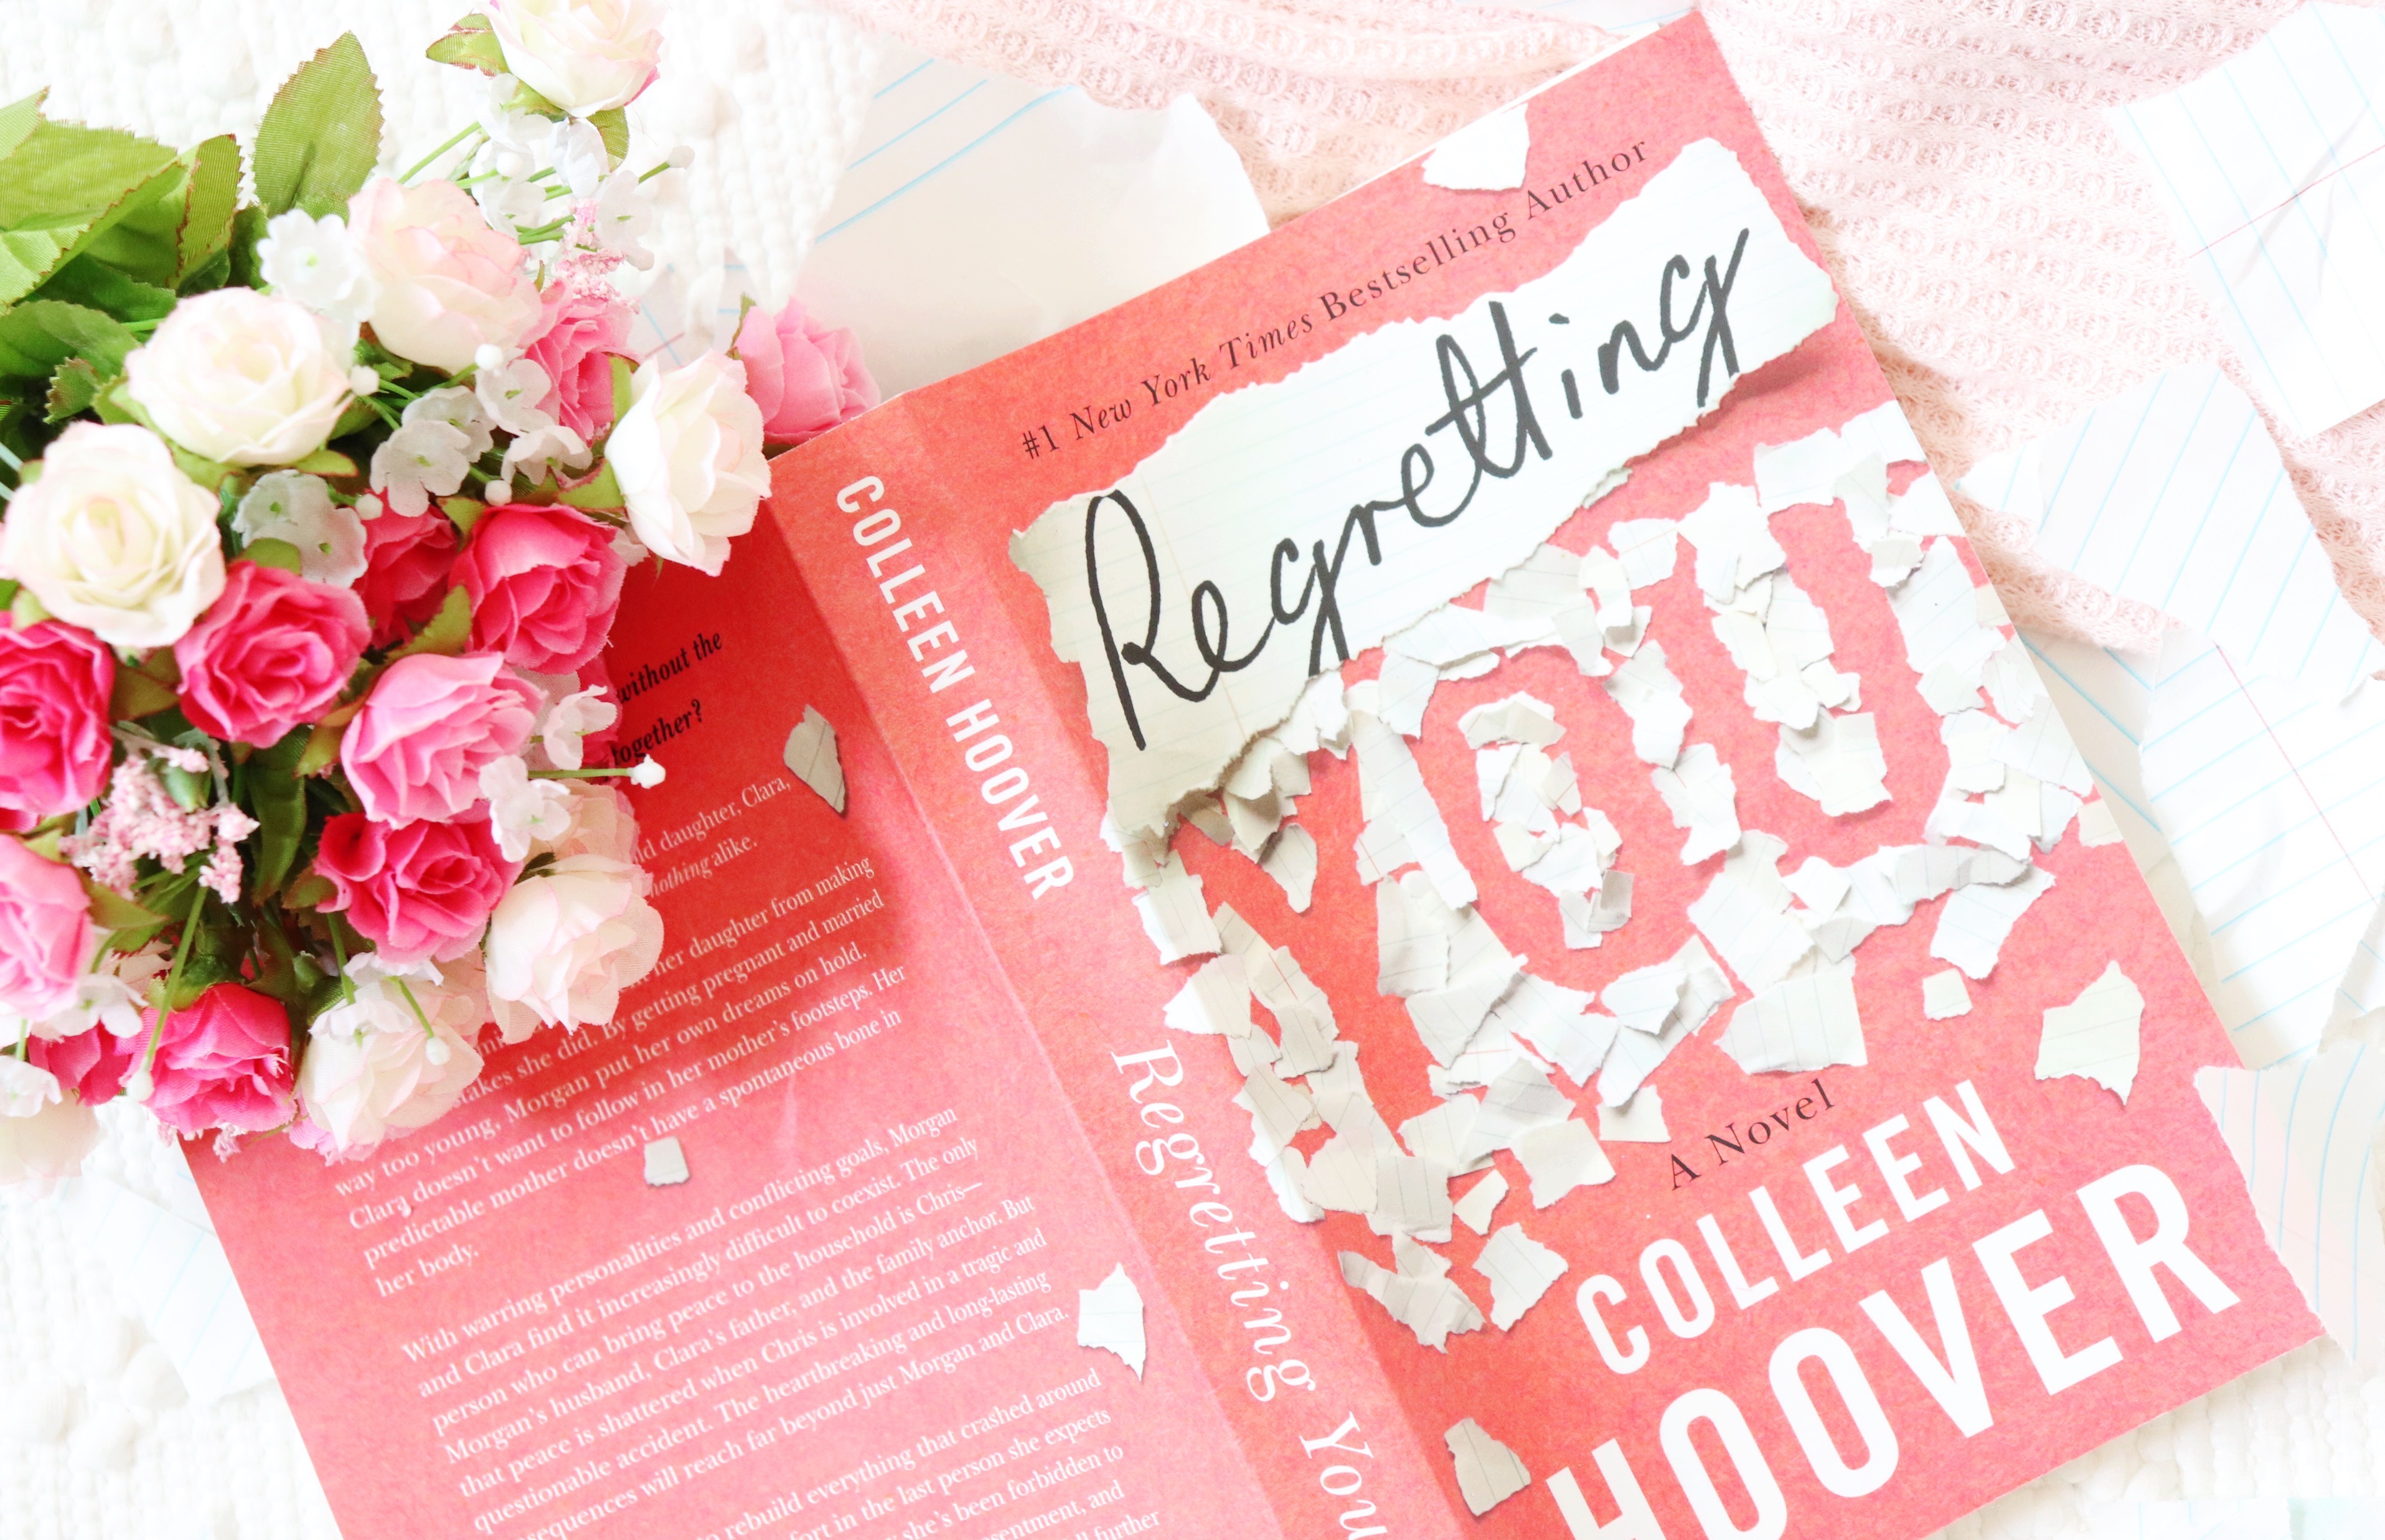 Regretting You By Colleen Hoover Book Review